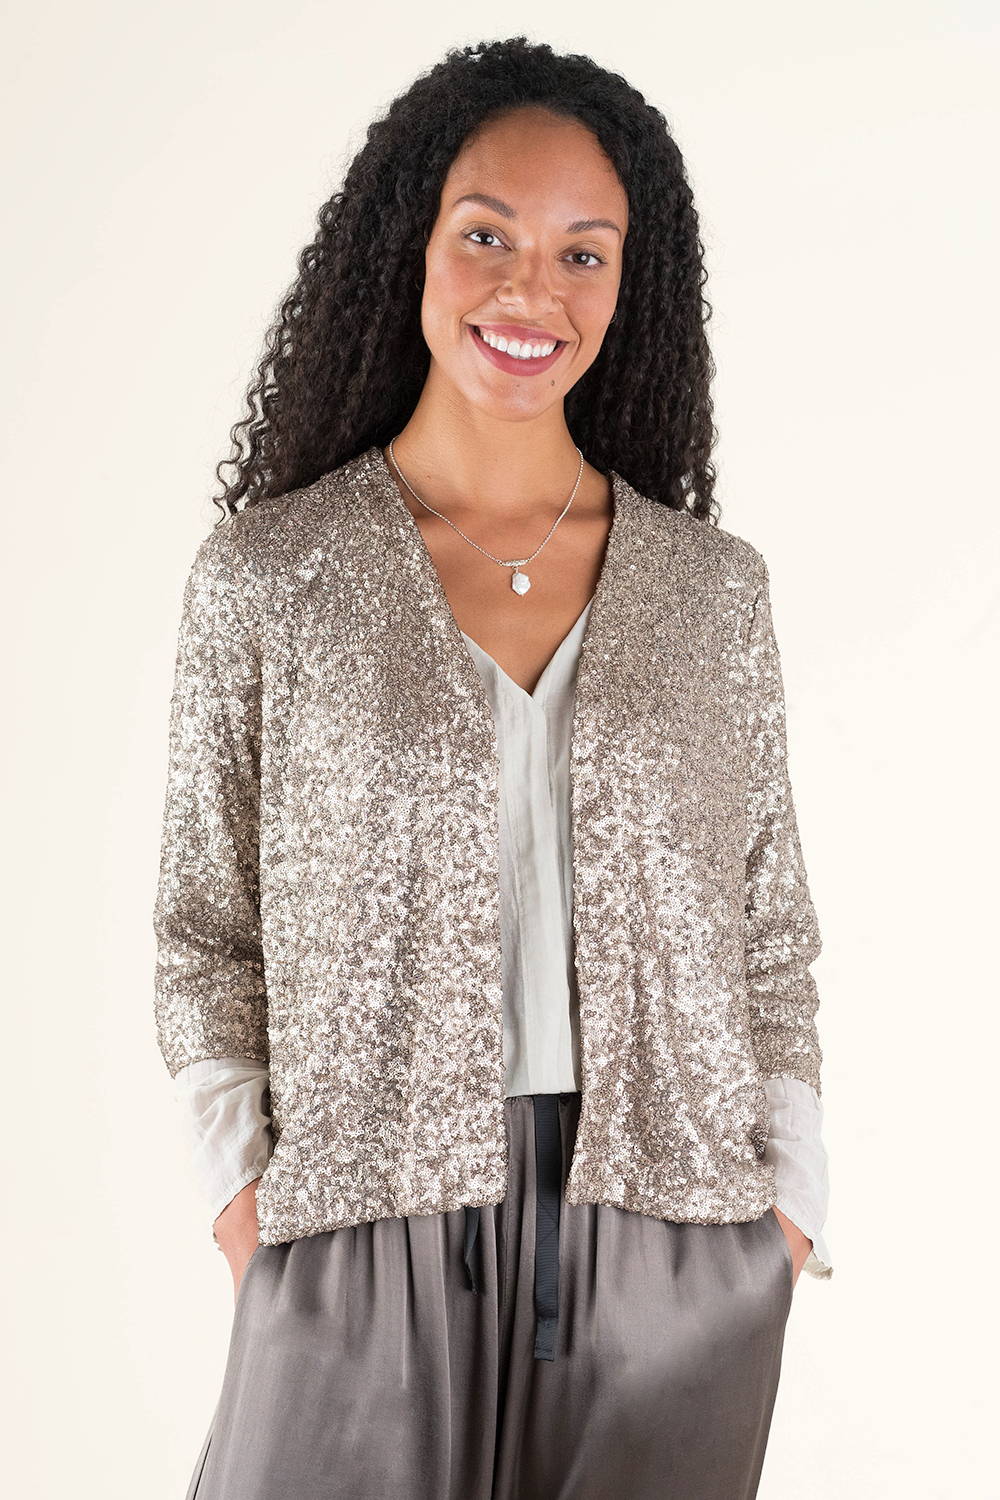 A model wearing a champagne cold sparkly jacket with a pearl necklace